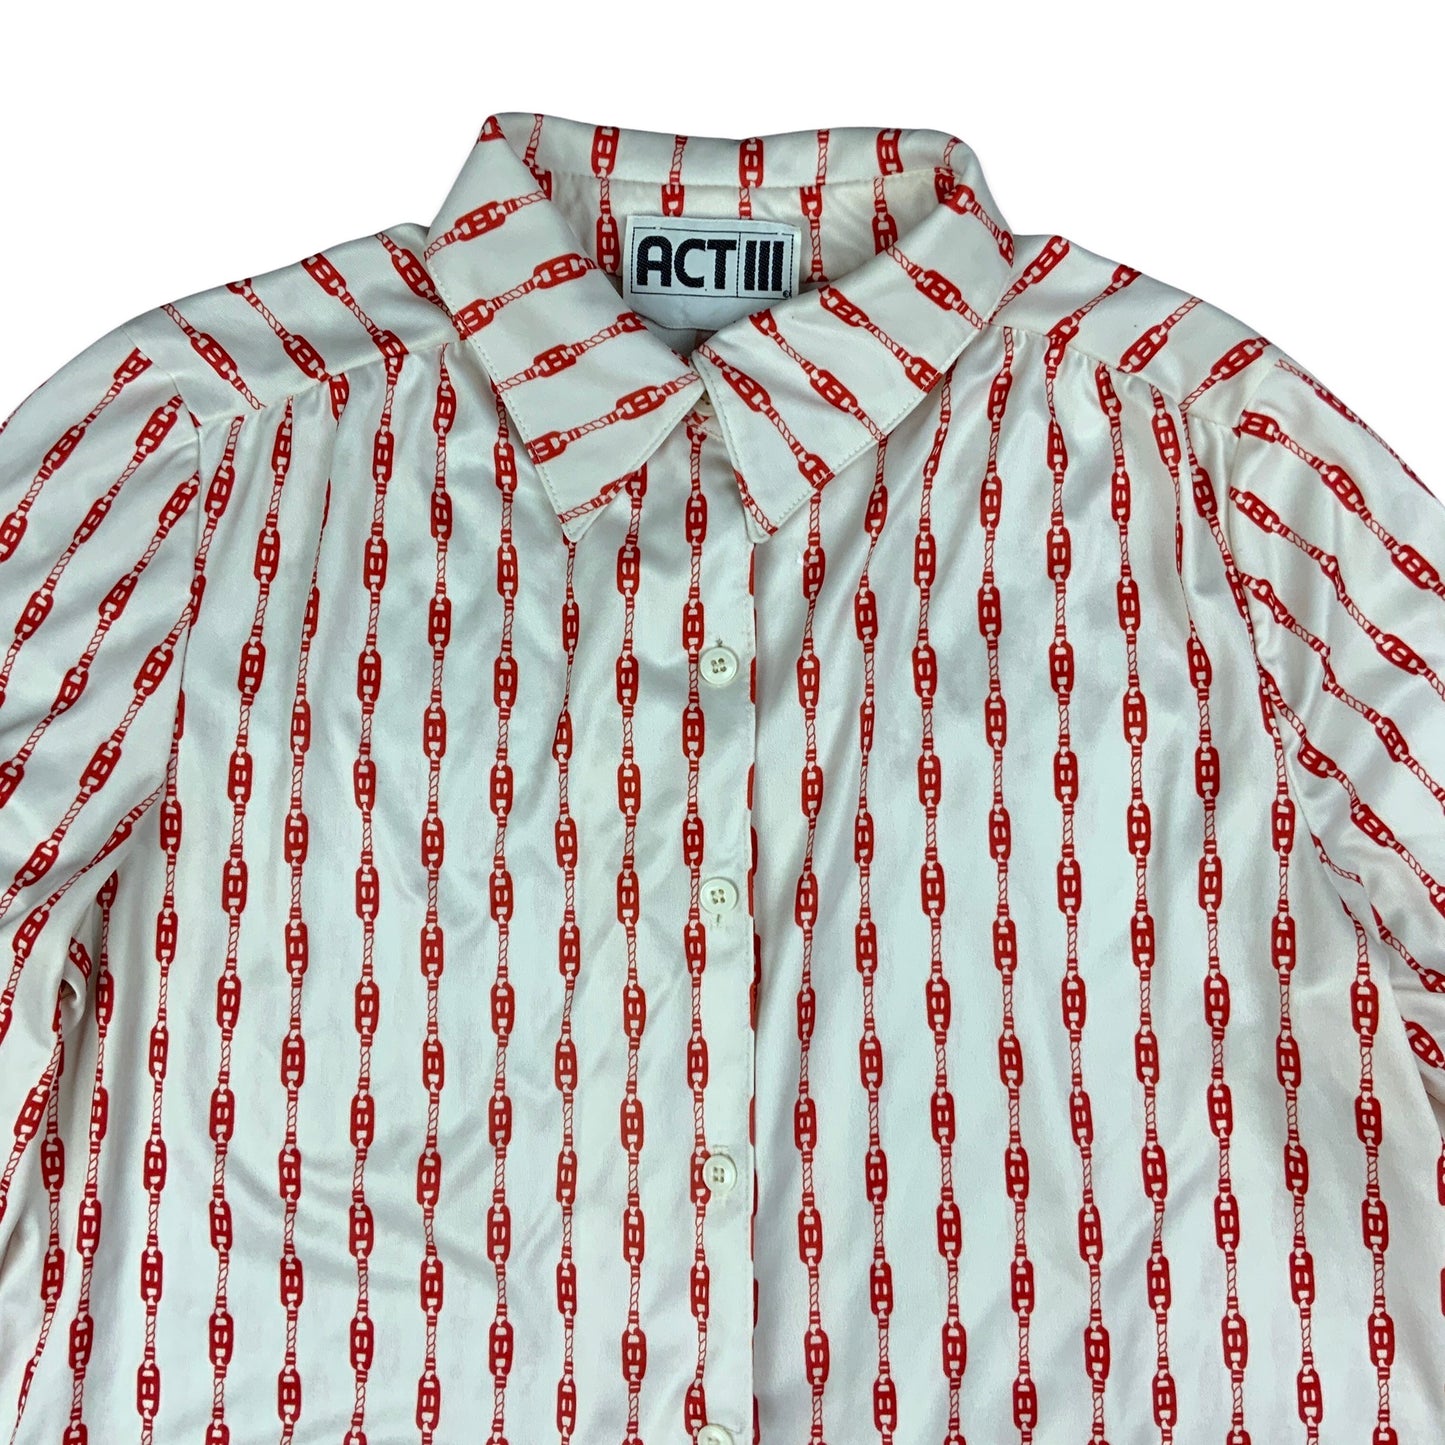 Vintage 90s White & Red Novelty Chain Print Blouse 10 12